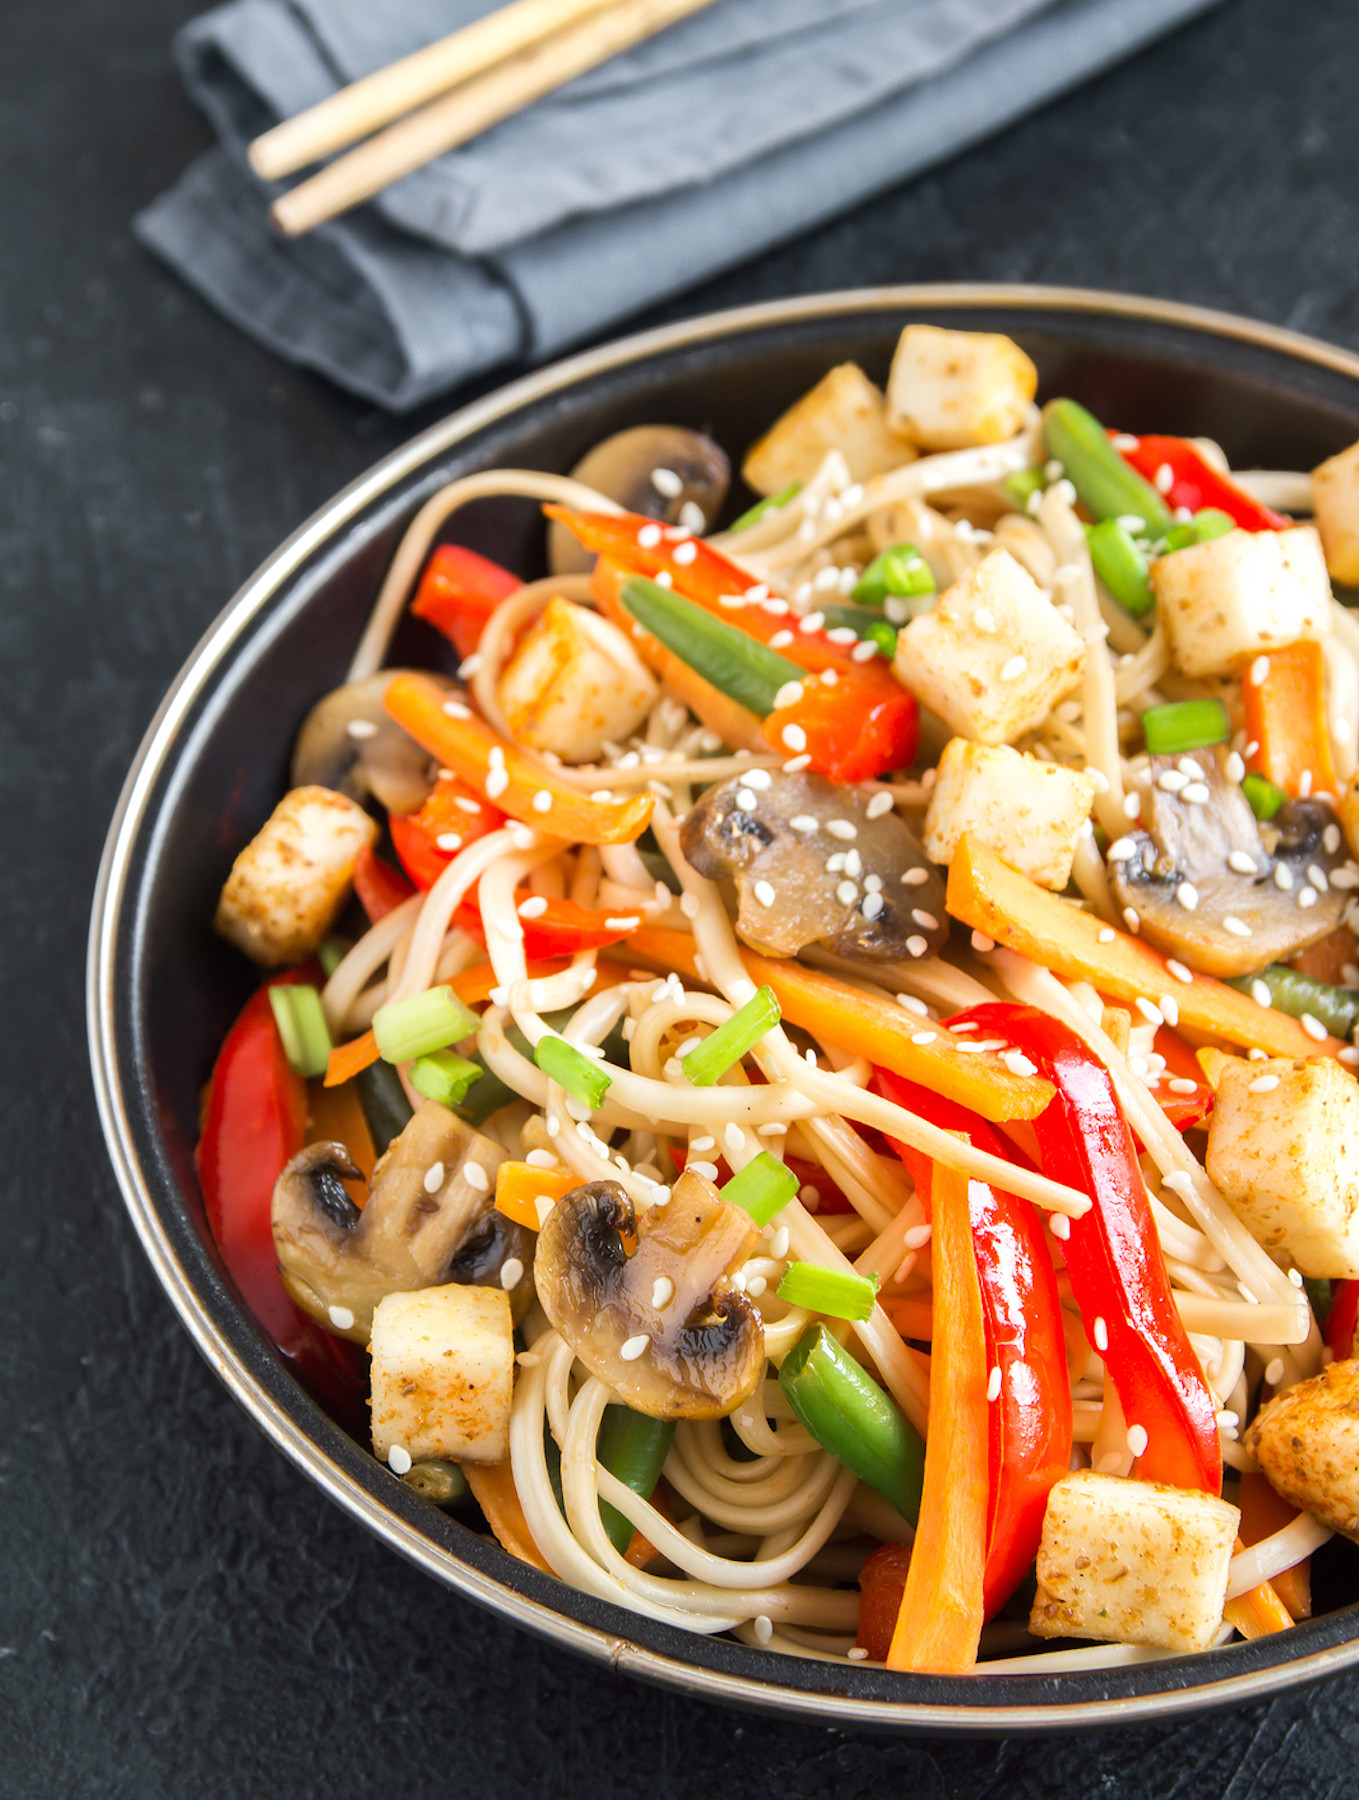 Vegetable Stir Fry With Noodles
 Teriyaki Asian Noodles with Tofu and Stir Fried Ve ables